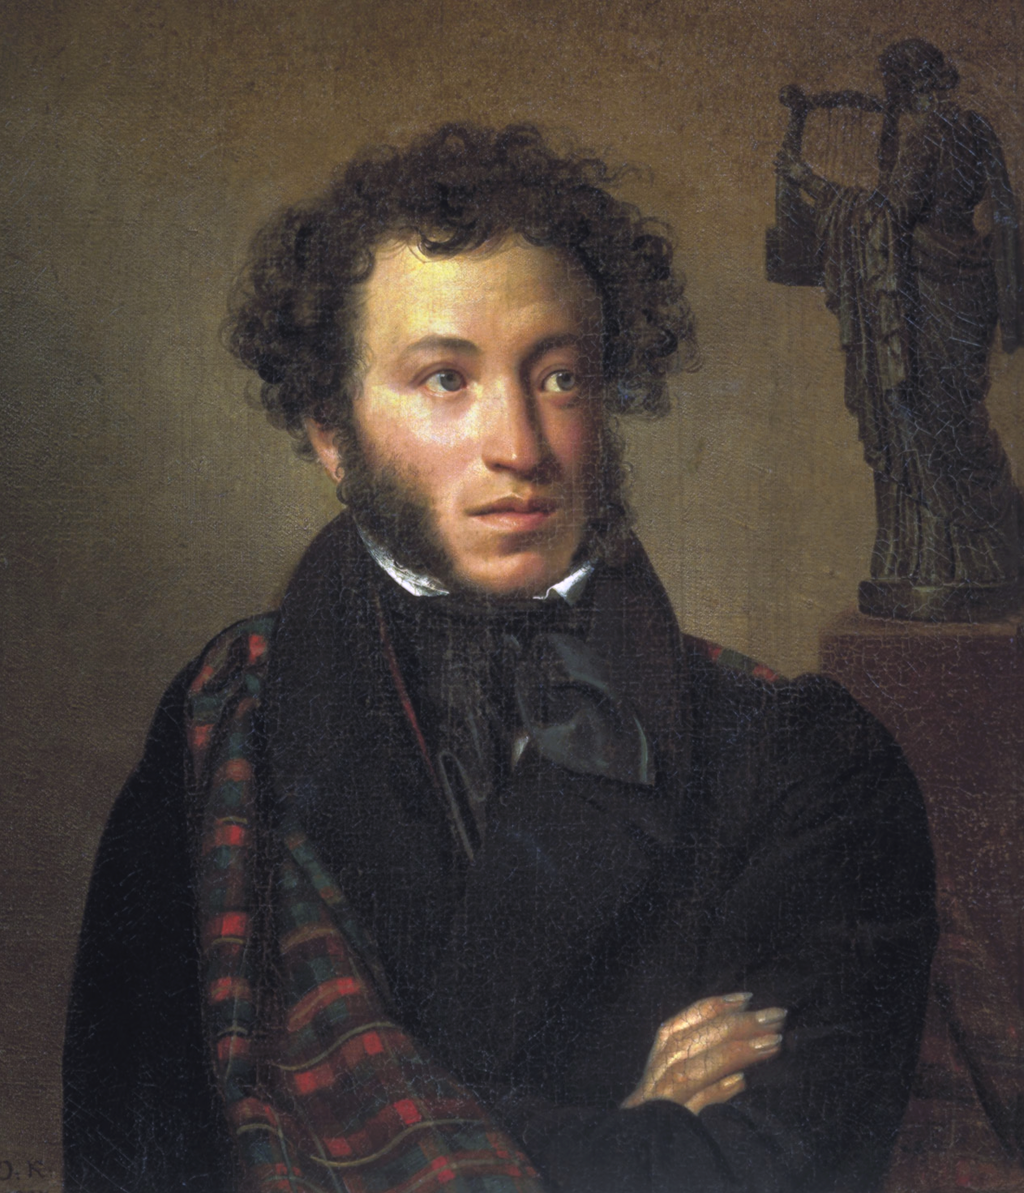 10 reasons why Pushkin is so great